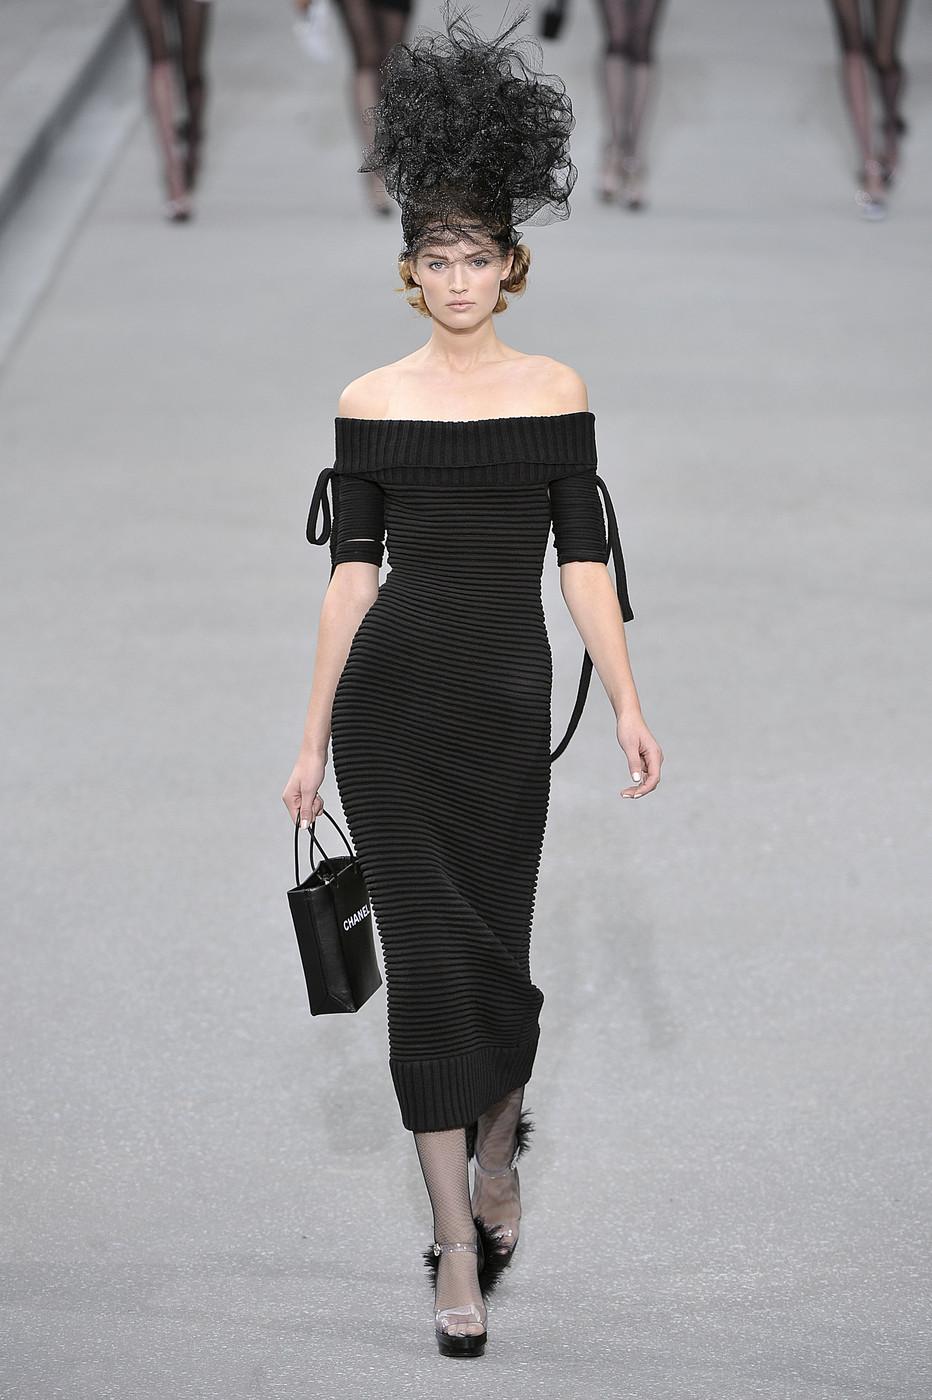 Chanel by Karl Lagerfeld, black ribbed knitted off shoulder maxi dress

Spring-Summer 2009